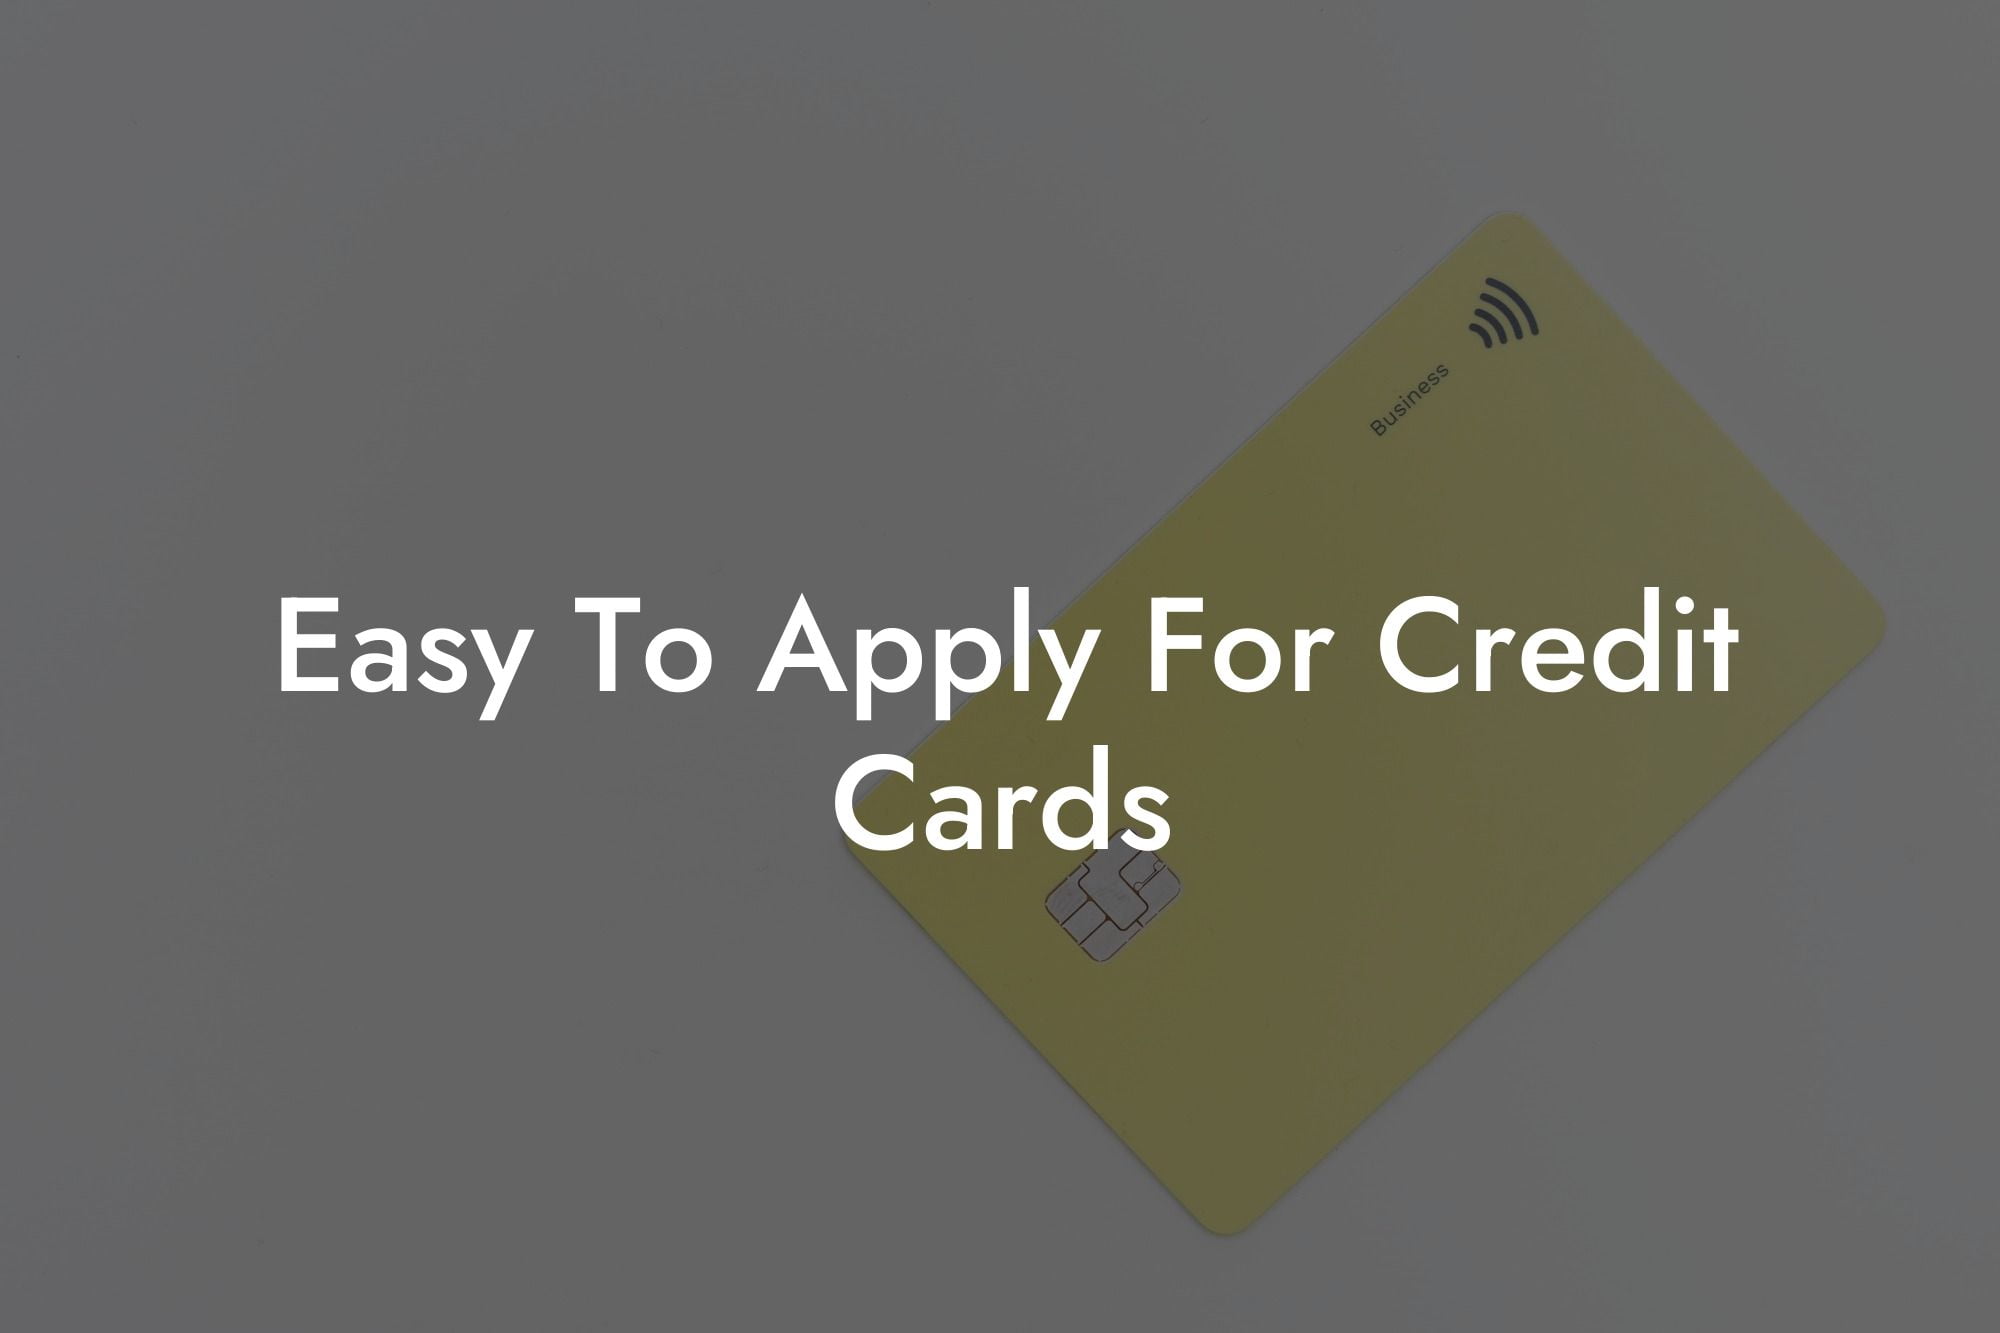 Easy To Apply For Credit Cards